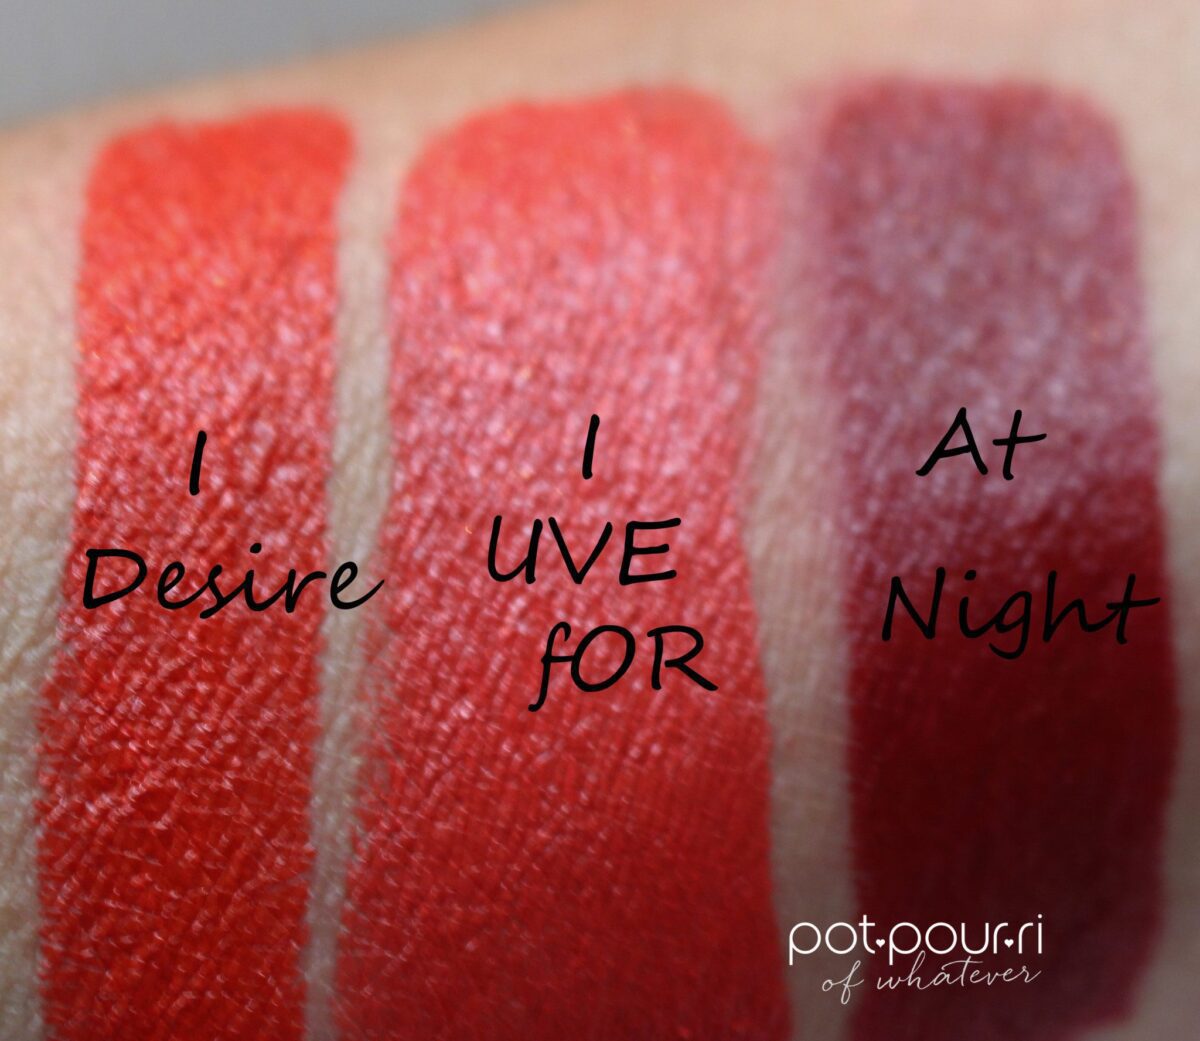 hourglass-confessions-i-desire-i-livefor-at-night-swatches